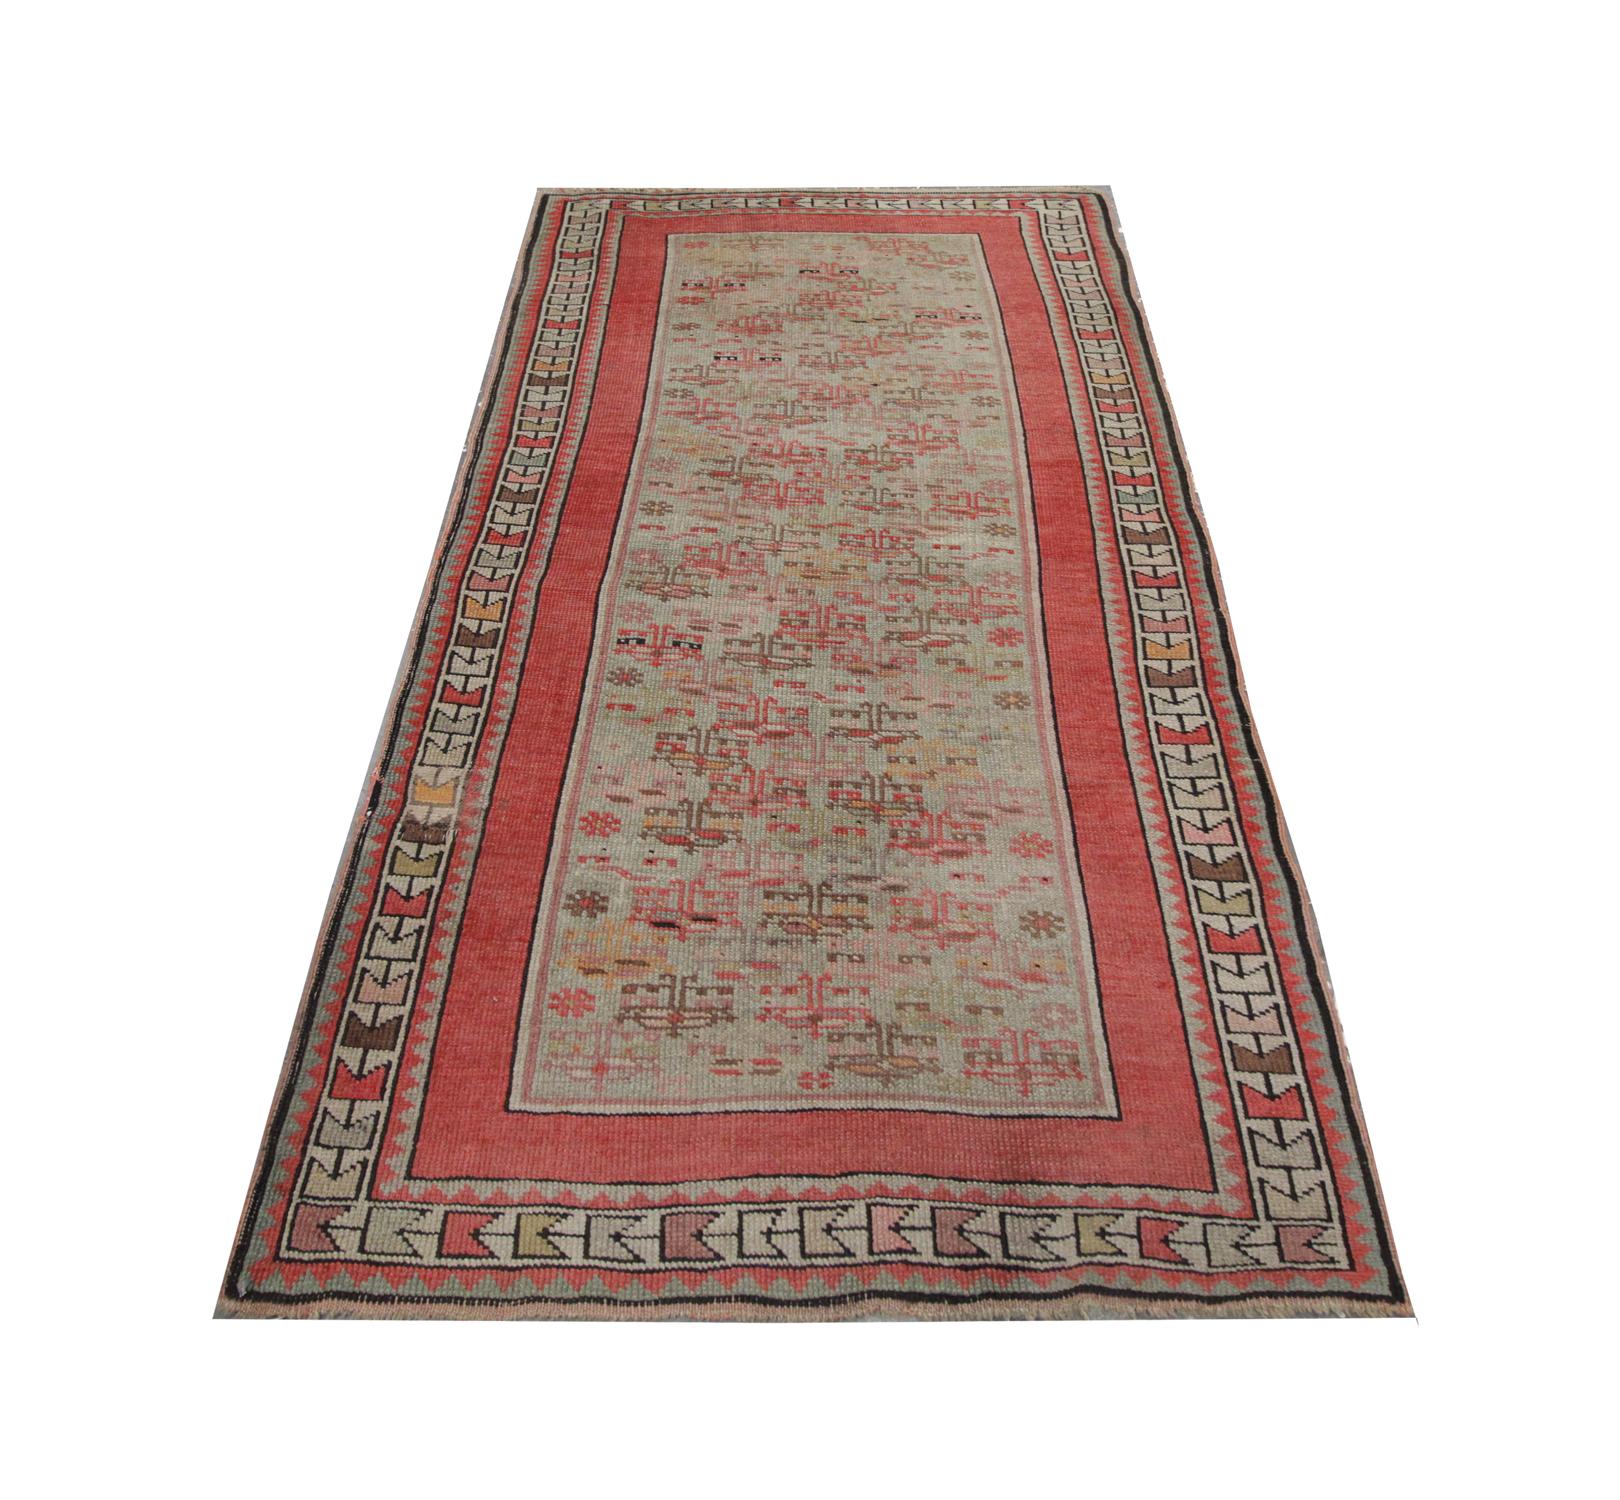 Light up your interior floors with this high-quality antique Caucasian Karabagh rug, with an abstract layered motif design- handwoven in 1890 with hand-spun, vegetable-dyed wool, and cotton, by some of the finest artisans. Perfect for both modern or